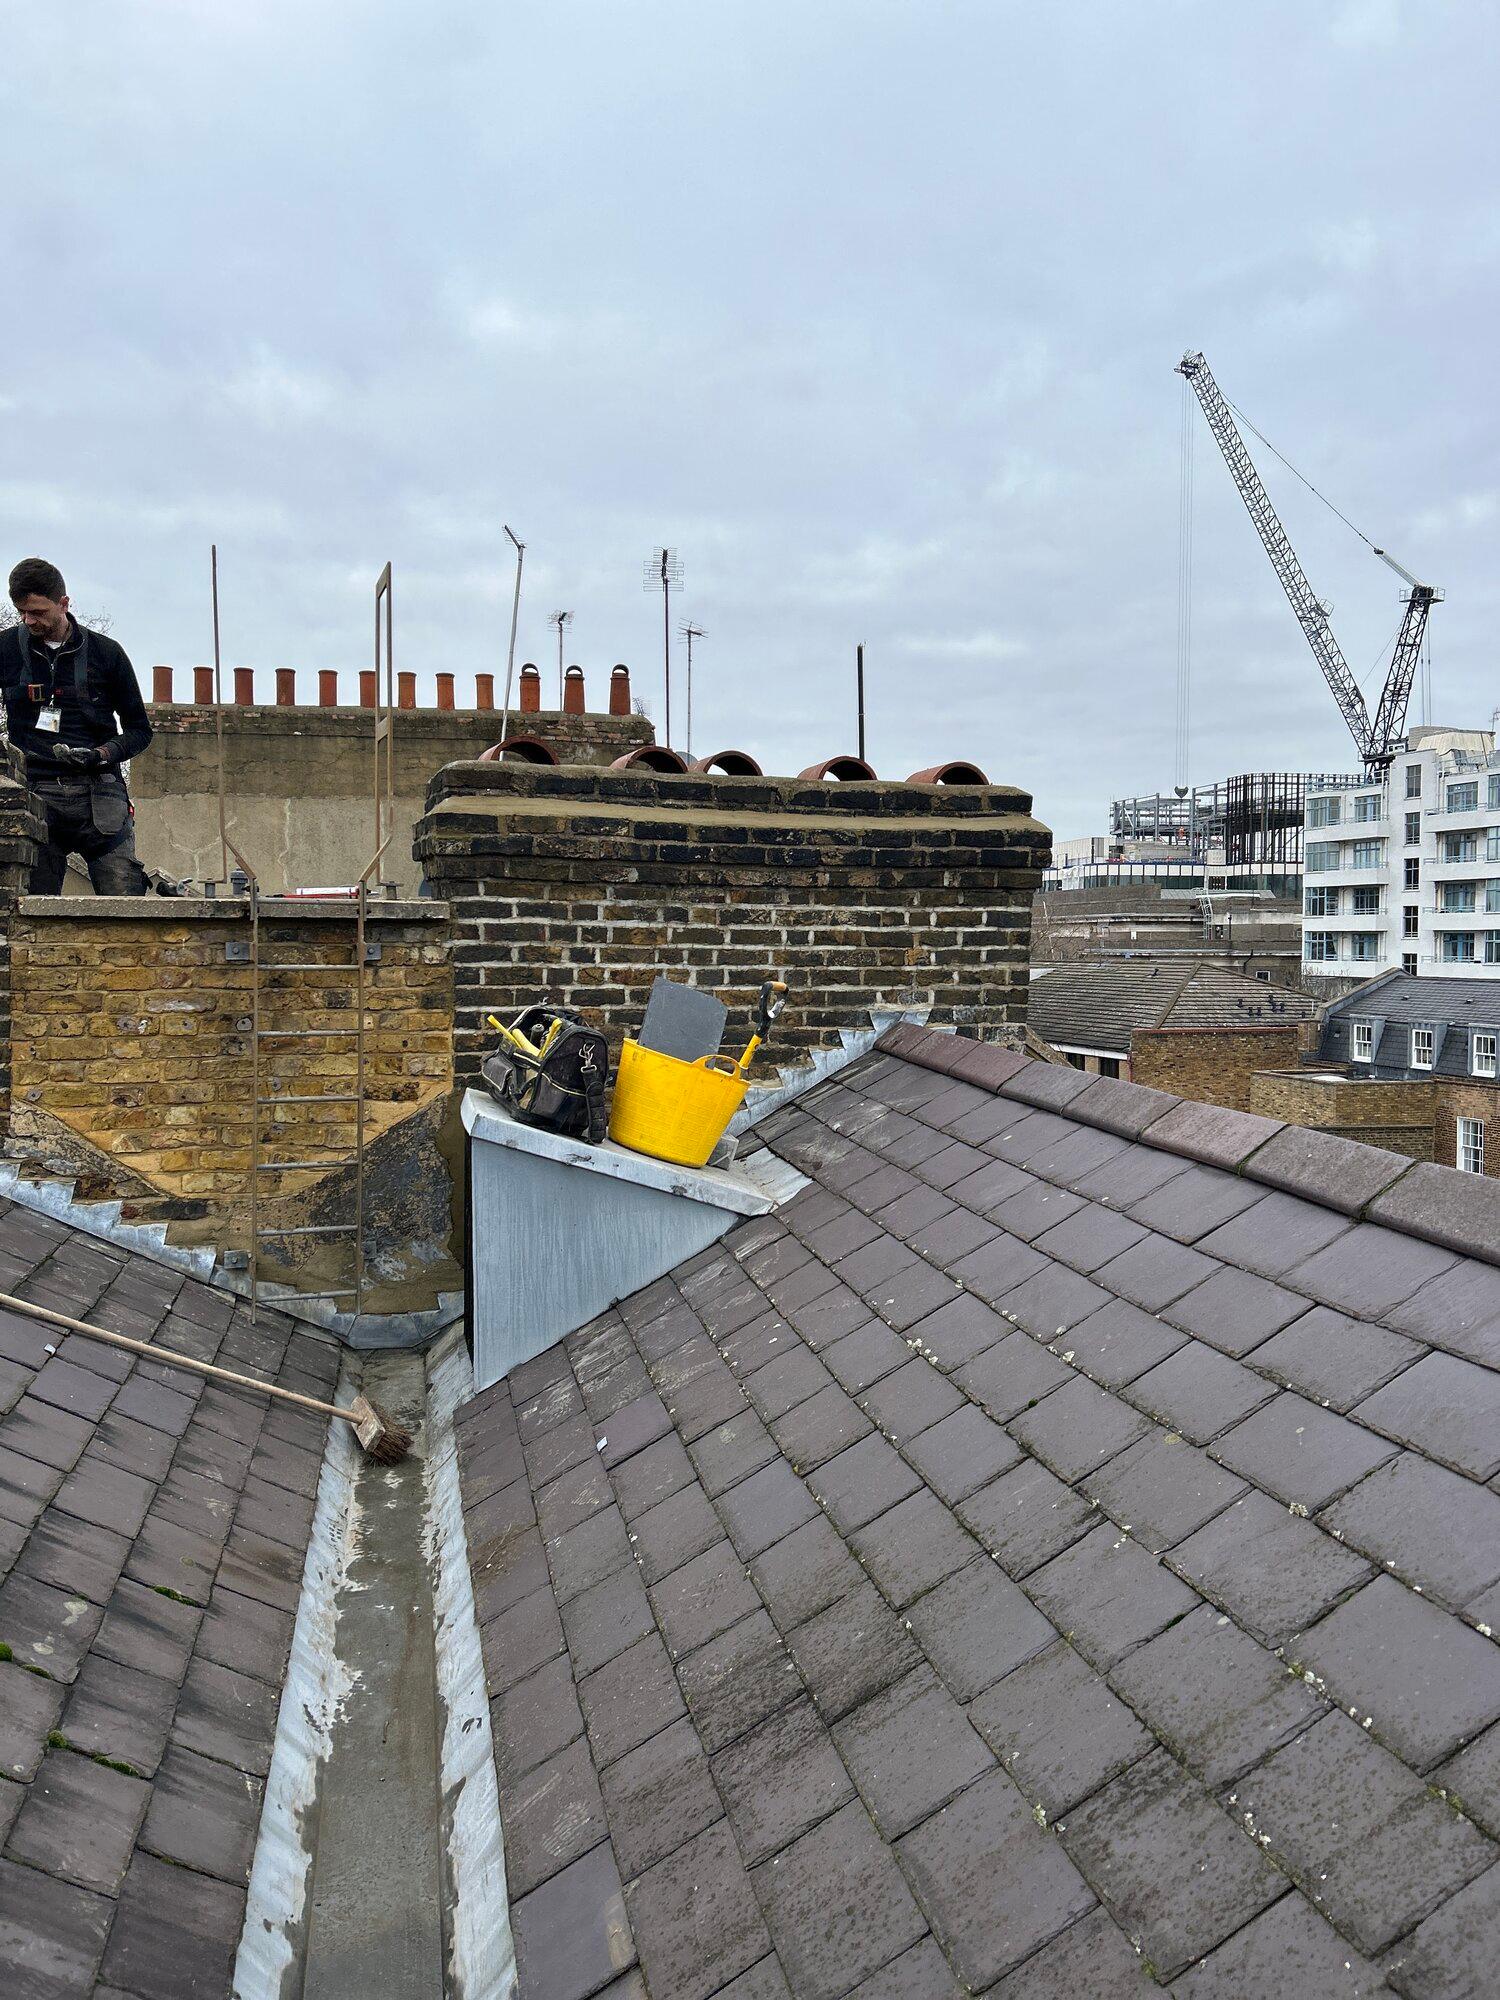 Images Cityscape roofing and building ltd